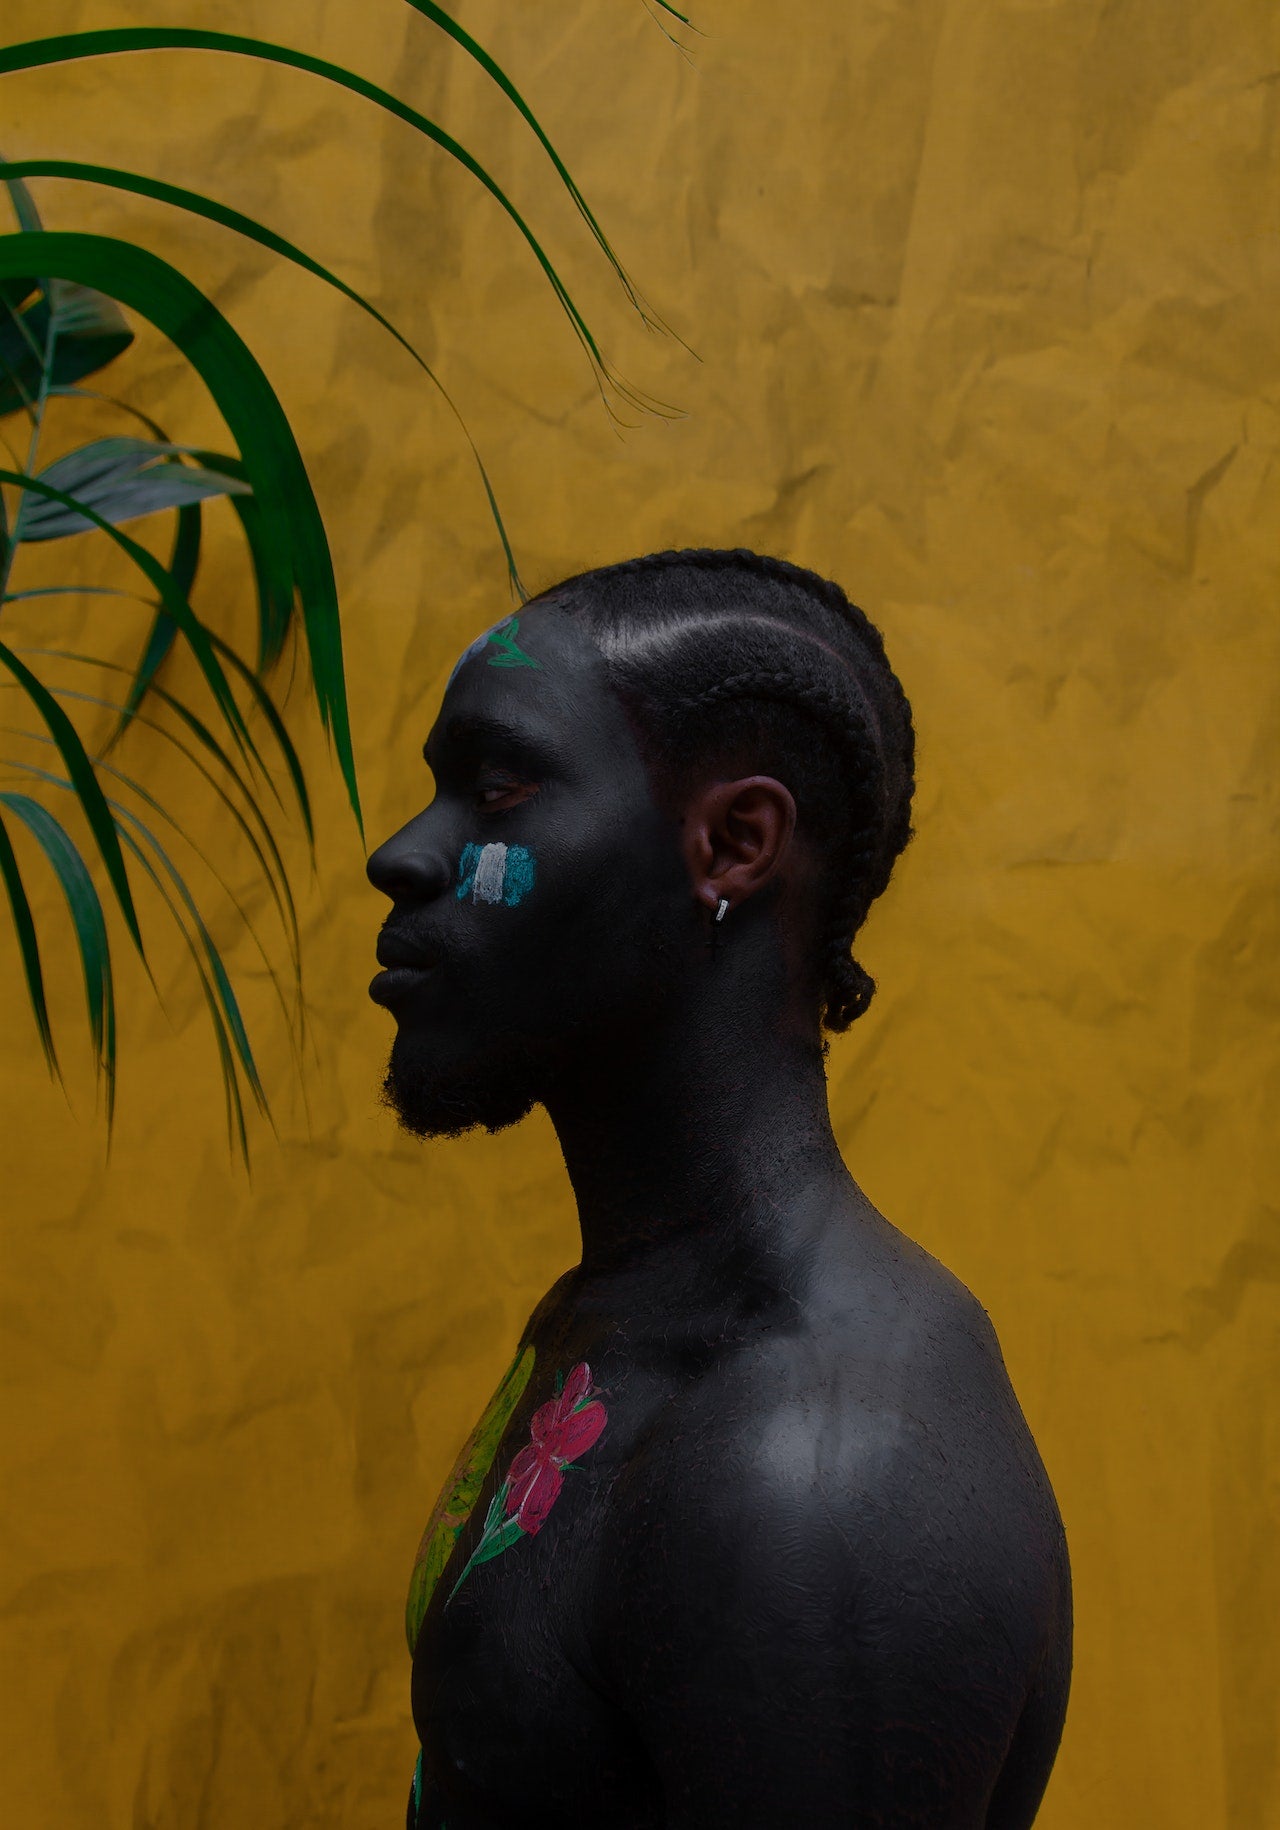 Photo by Ante : https://www.pexels.com/photo/black-guy-with-painted-face-and-body-on-yellow-surface-6429315/